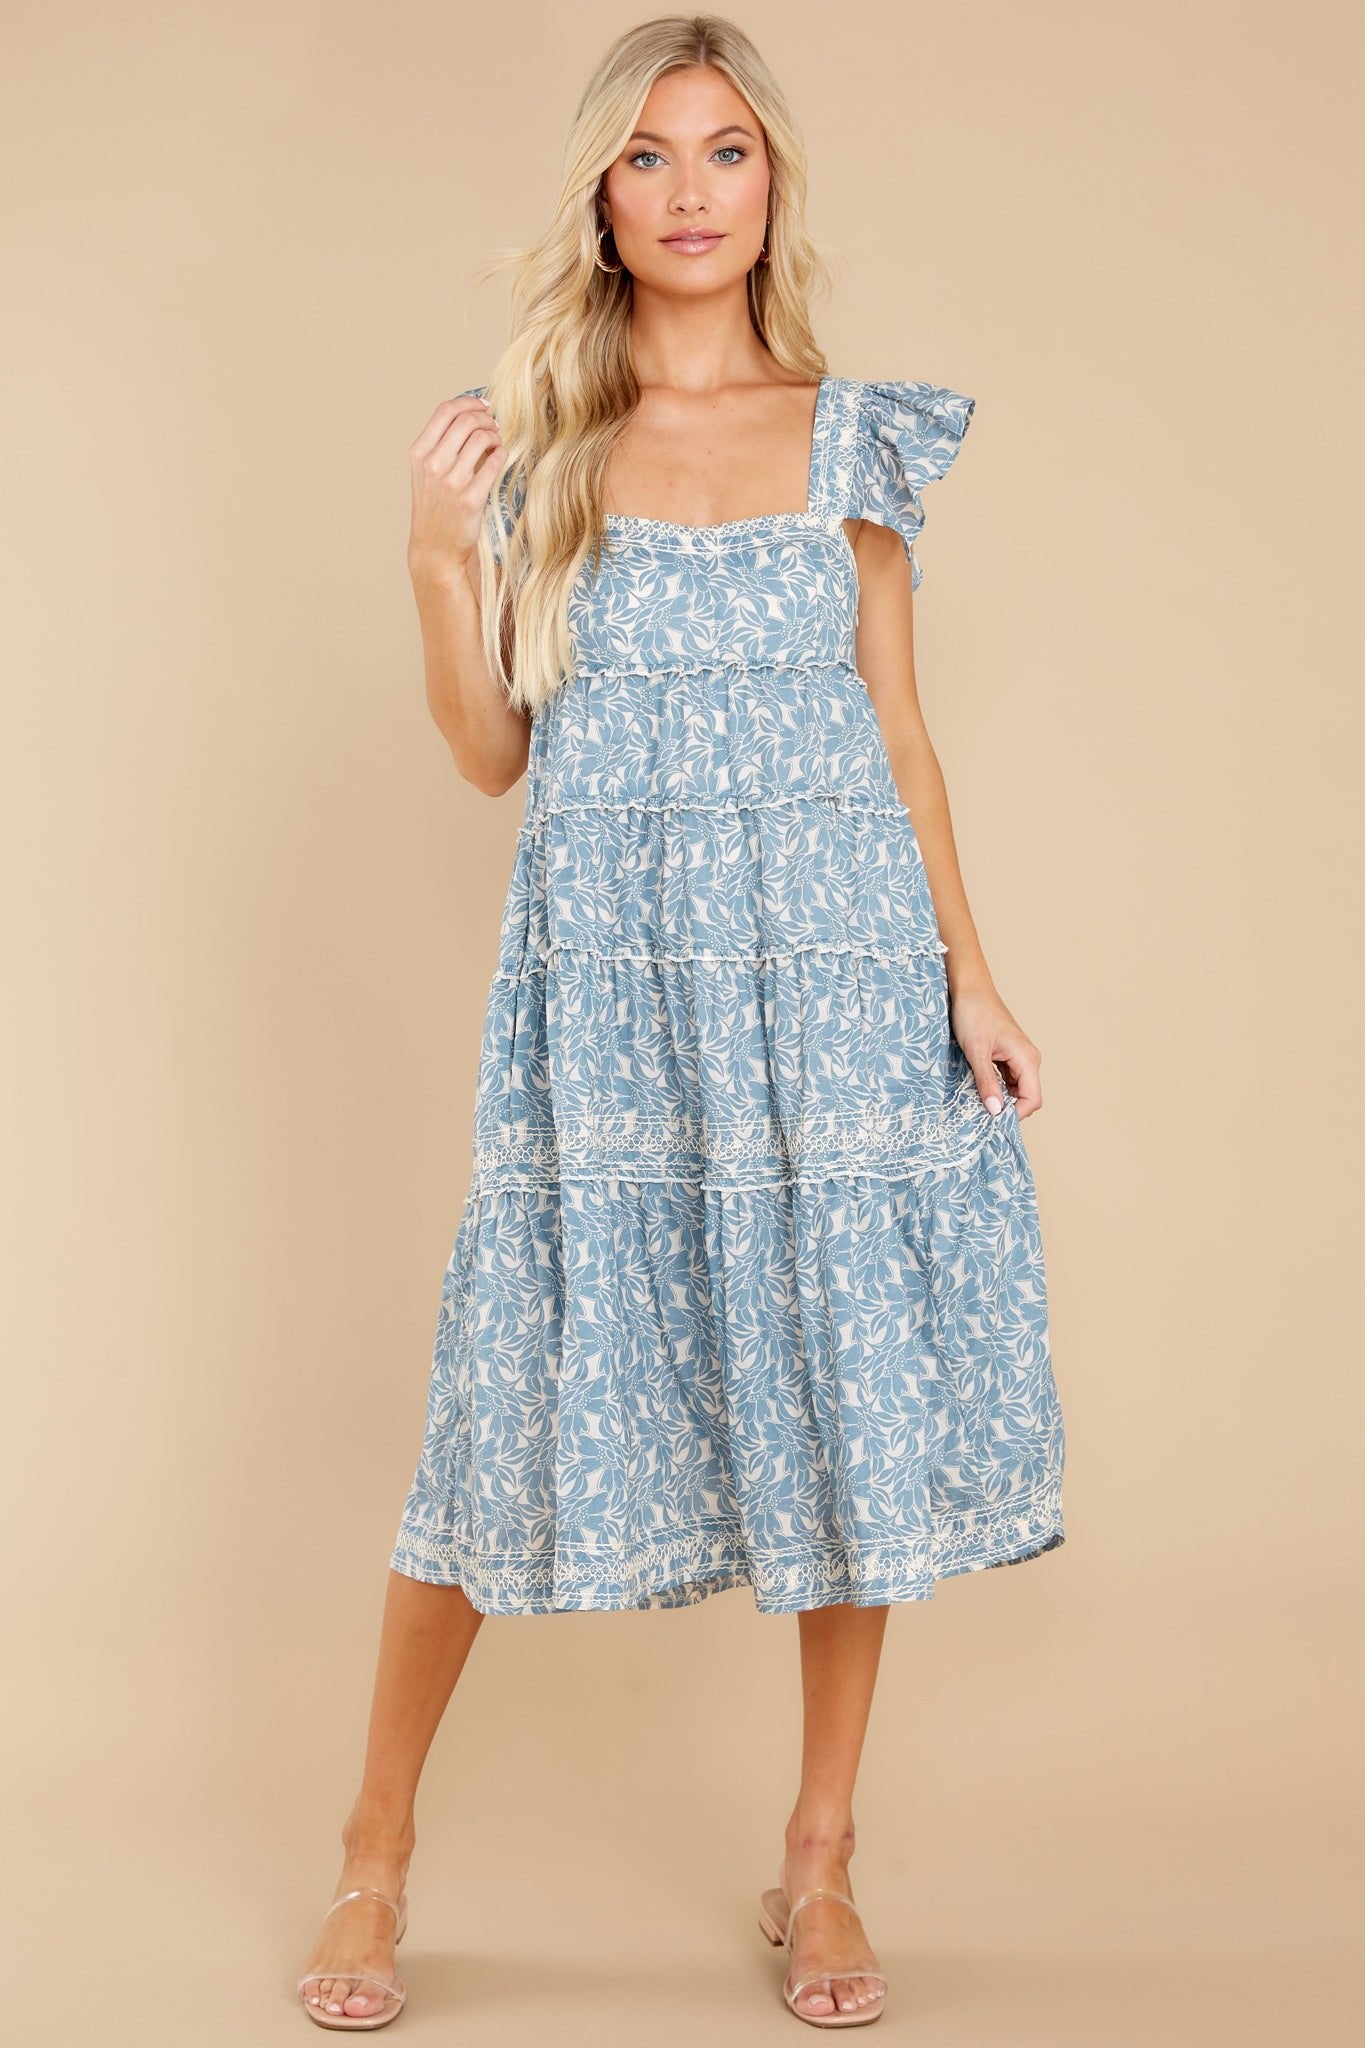 Always Promise Dusty Blue Floral Print Dress - Red Dress